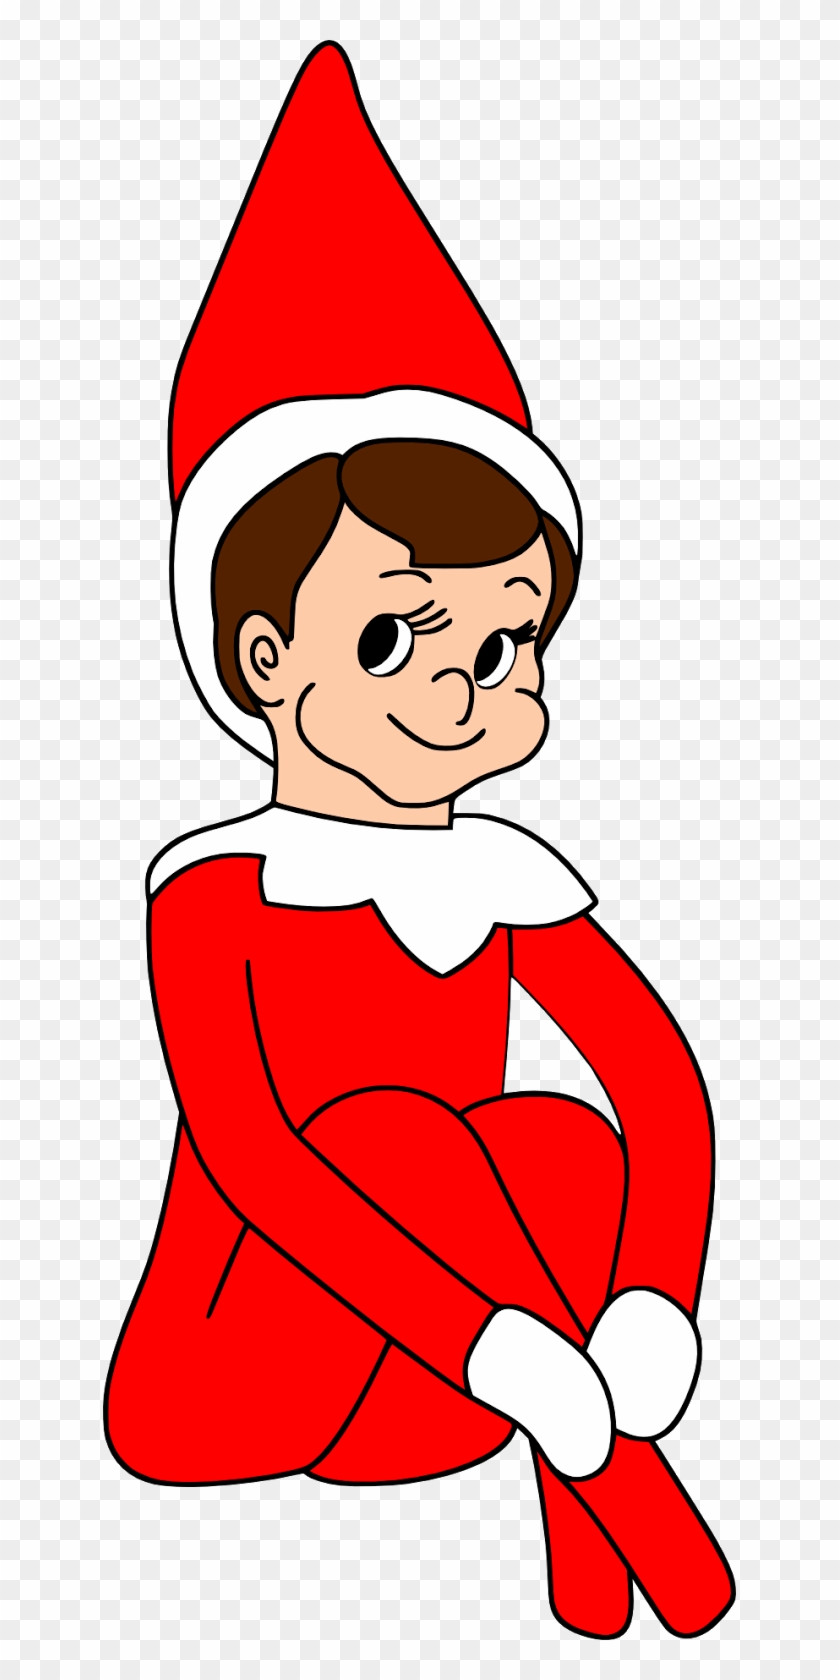 Shelf Cartoon / Subscribe for the elf on the shelf magic all year round